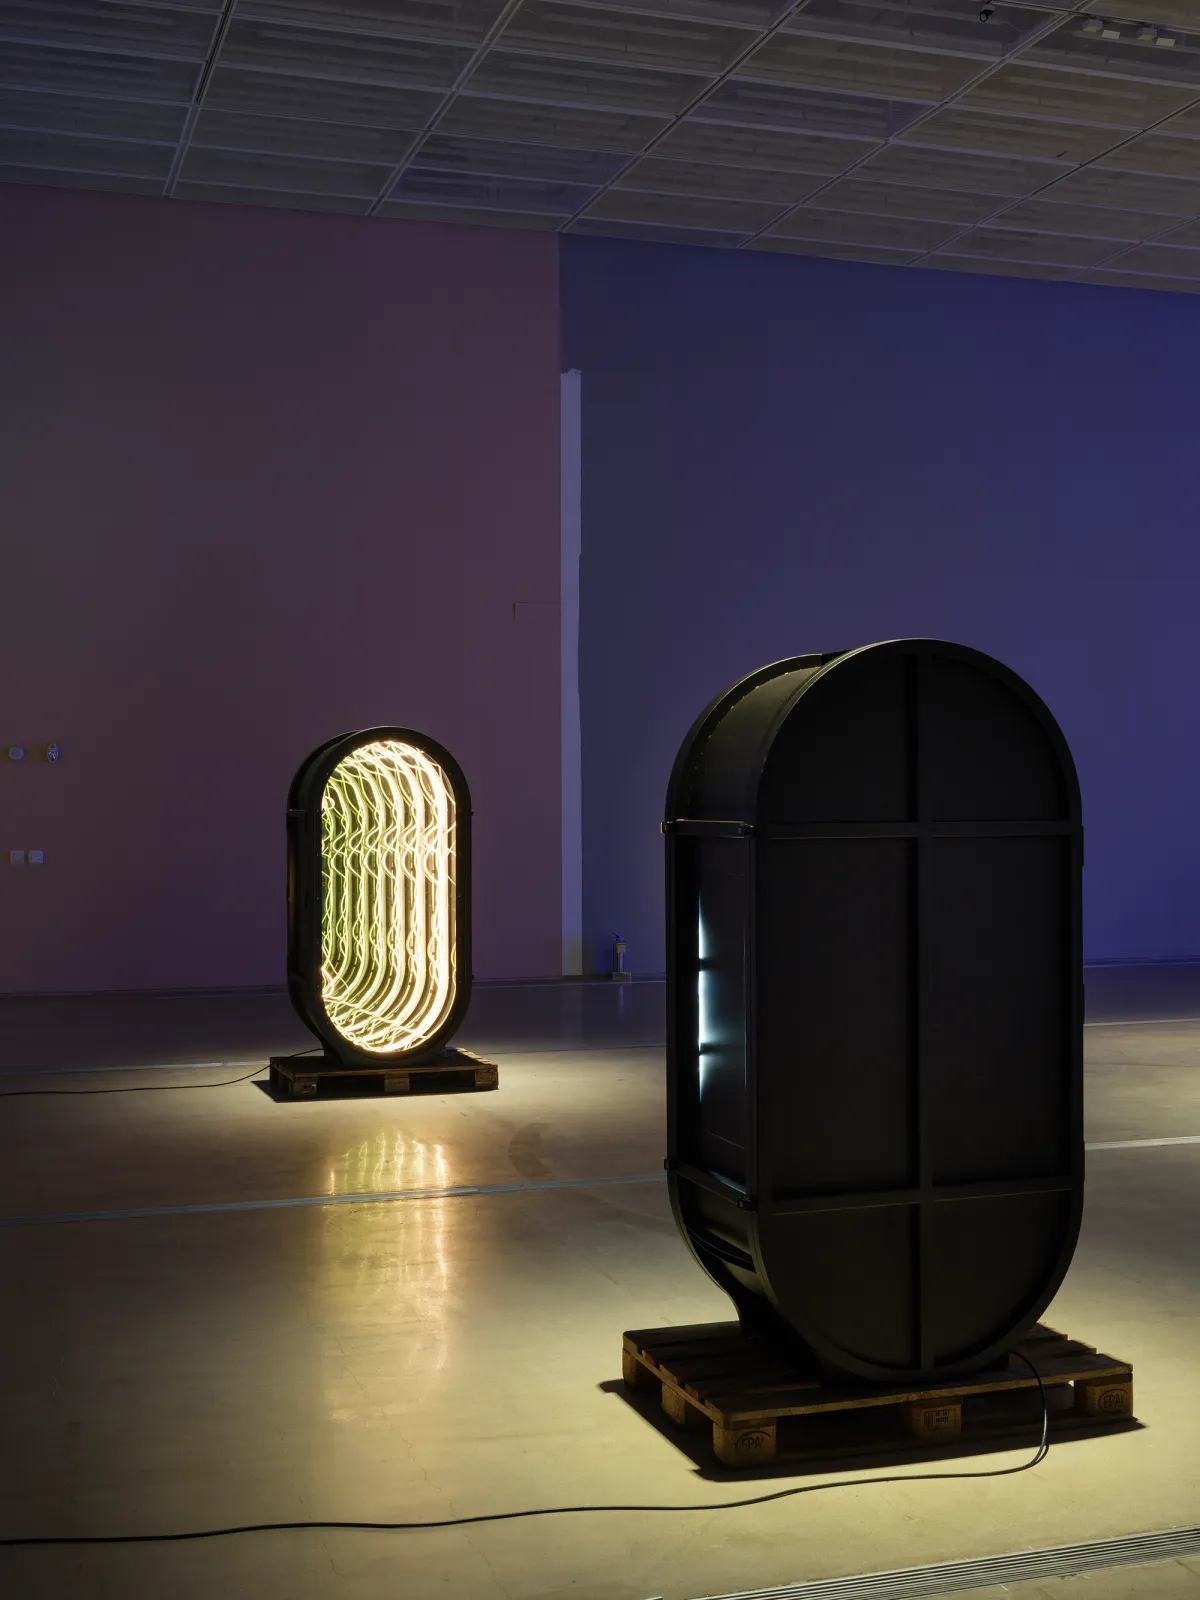 Two device-like sculptures resembling portals, stand independently in an art installation room with purple walls.